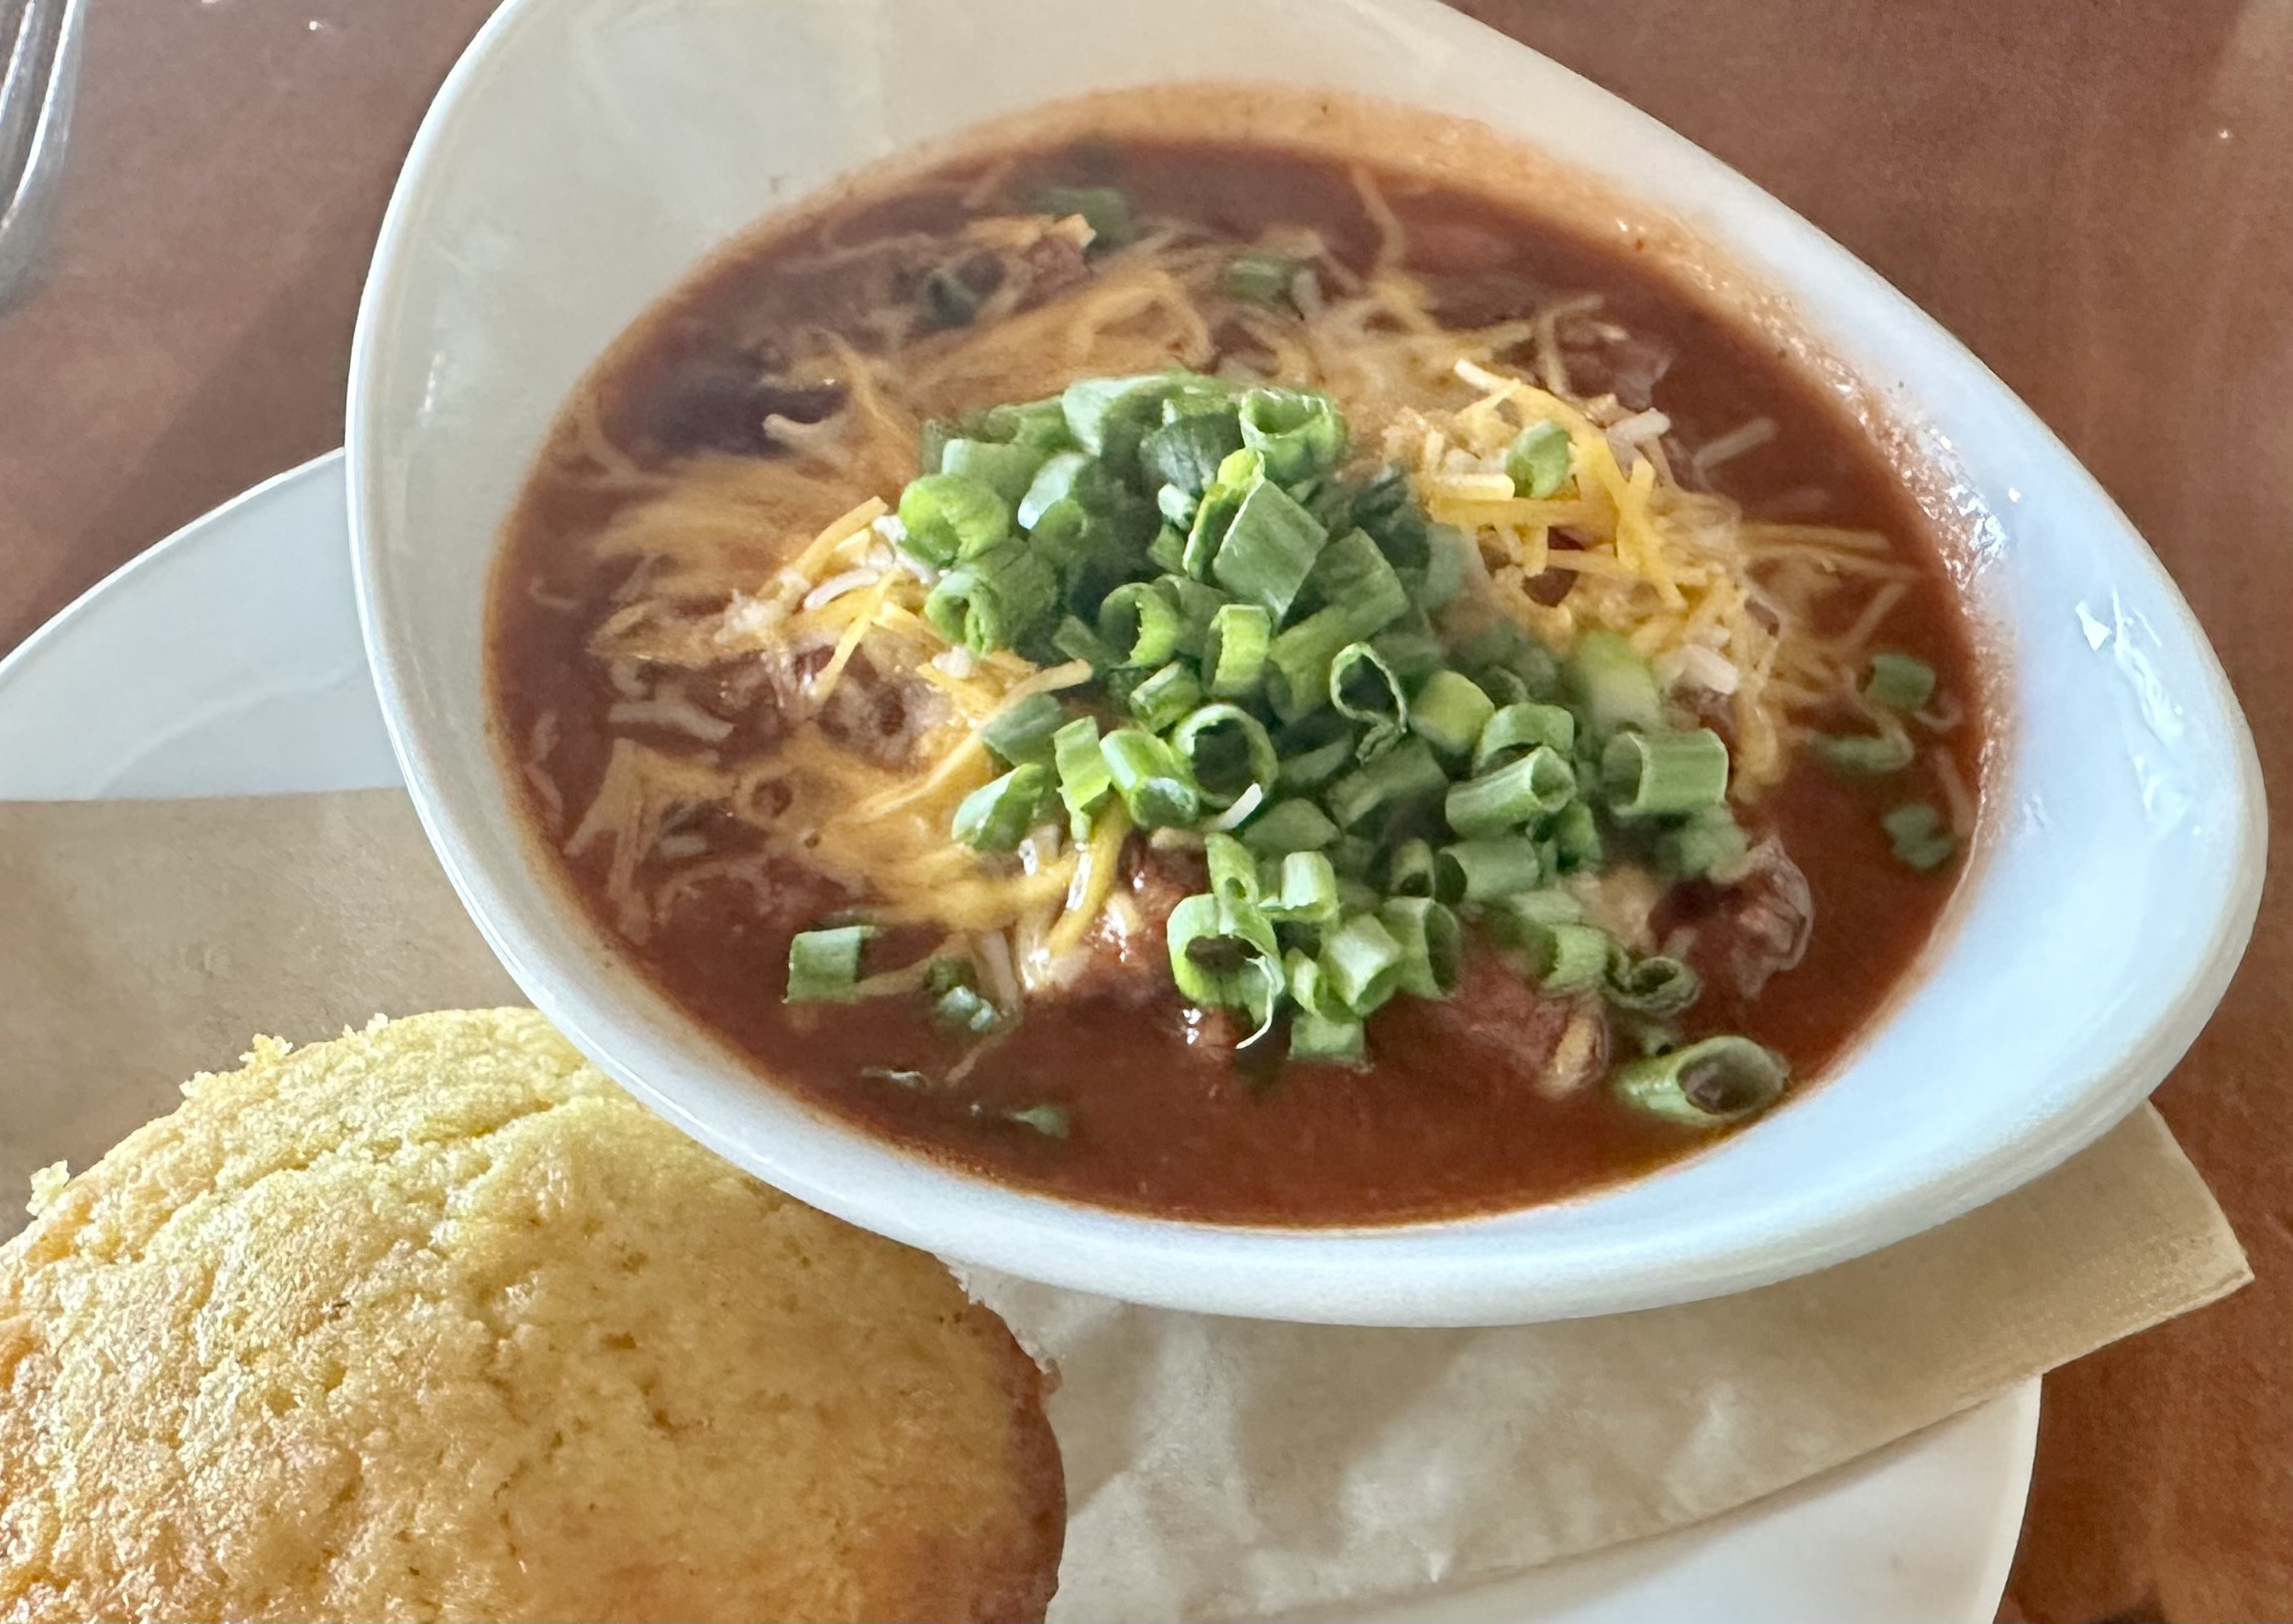 Chili and cornbread with onions and beans and cheese